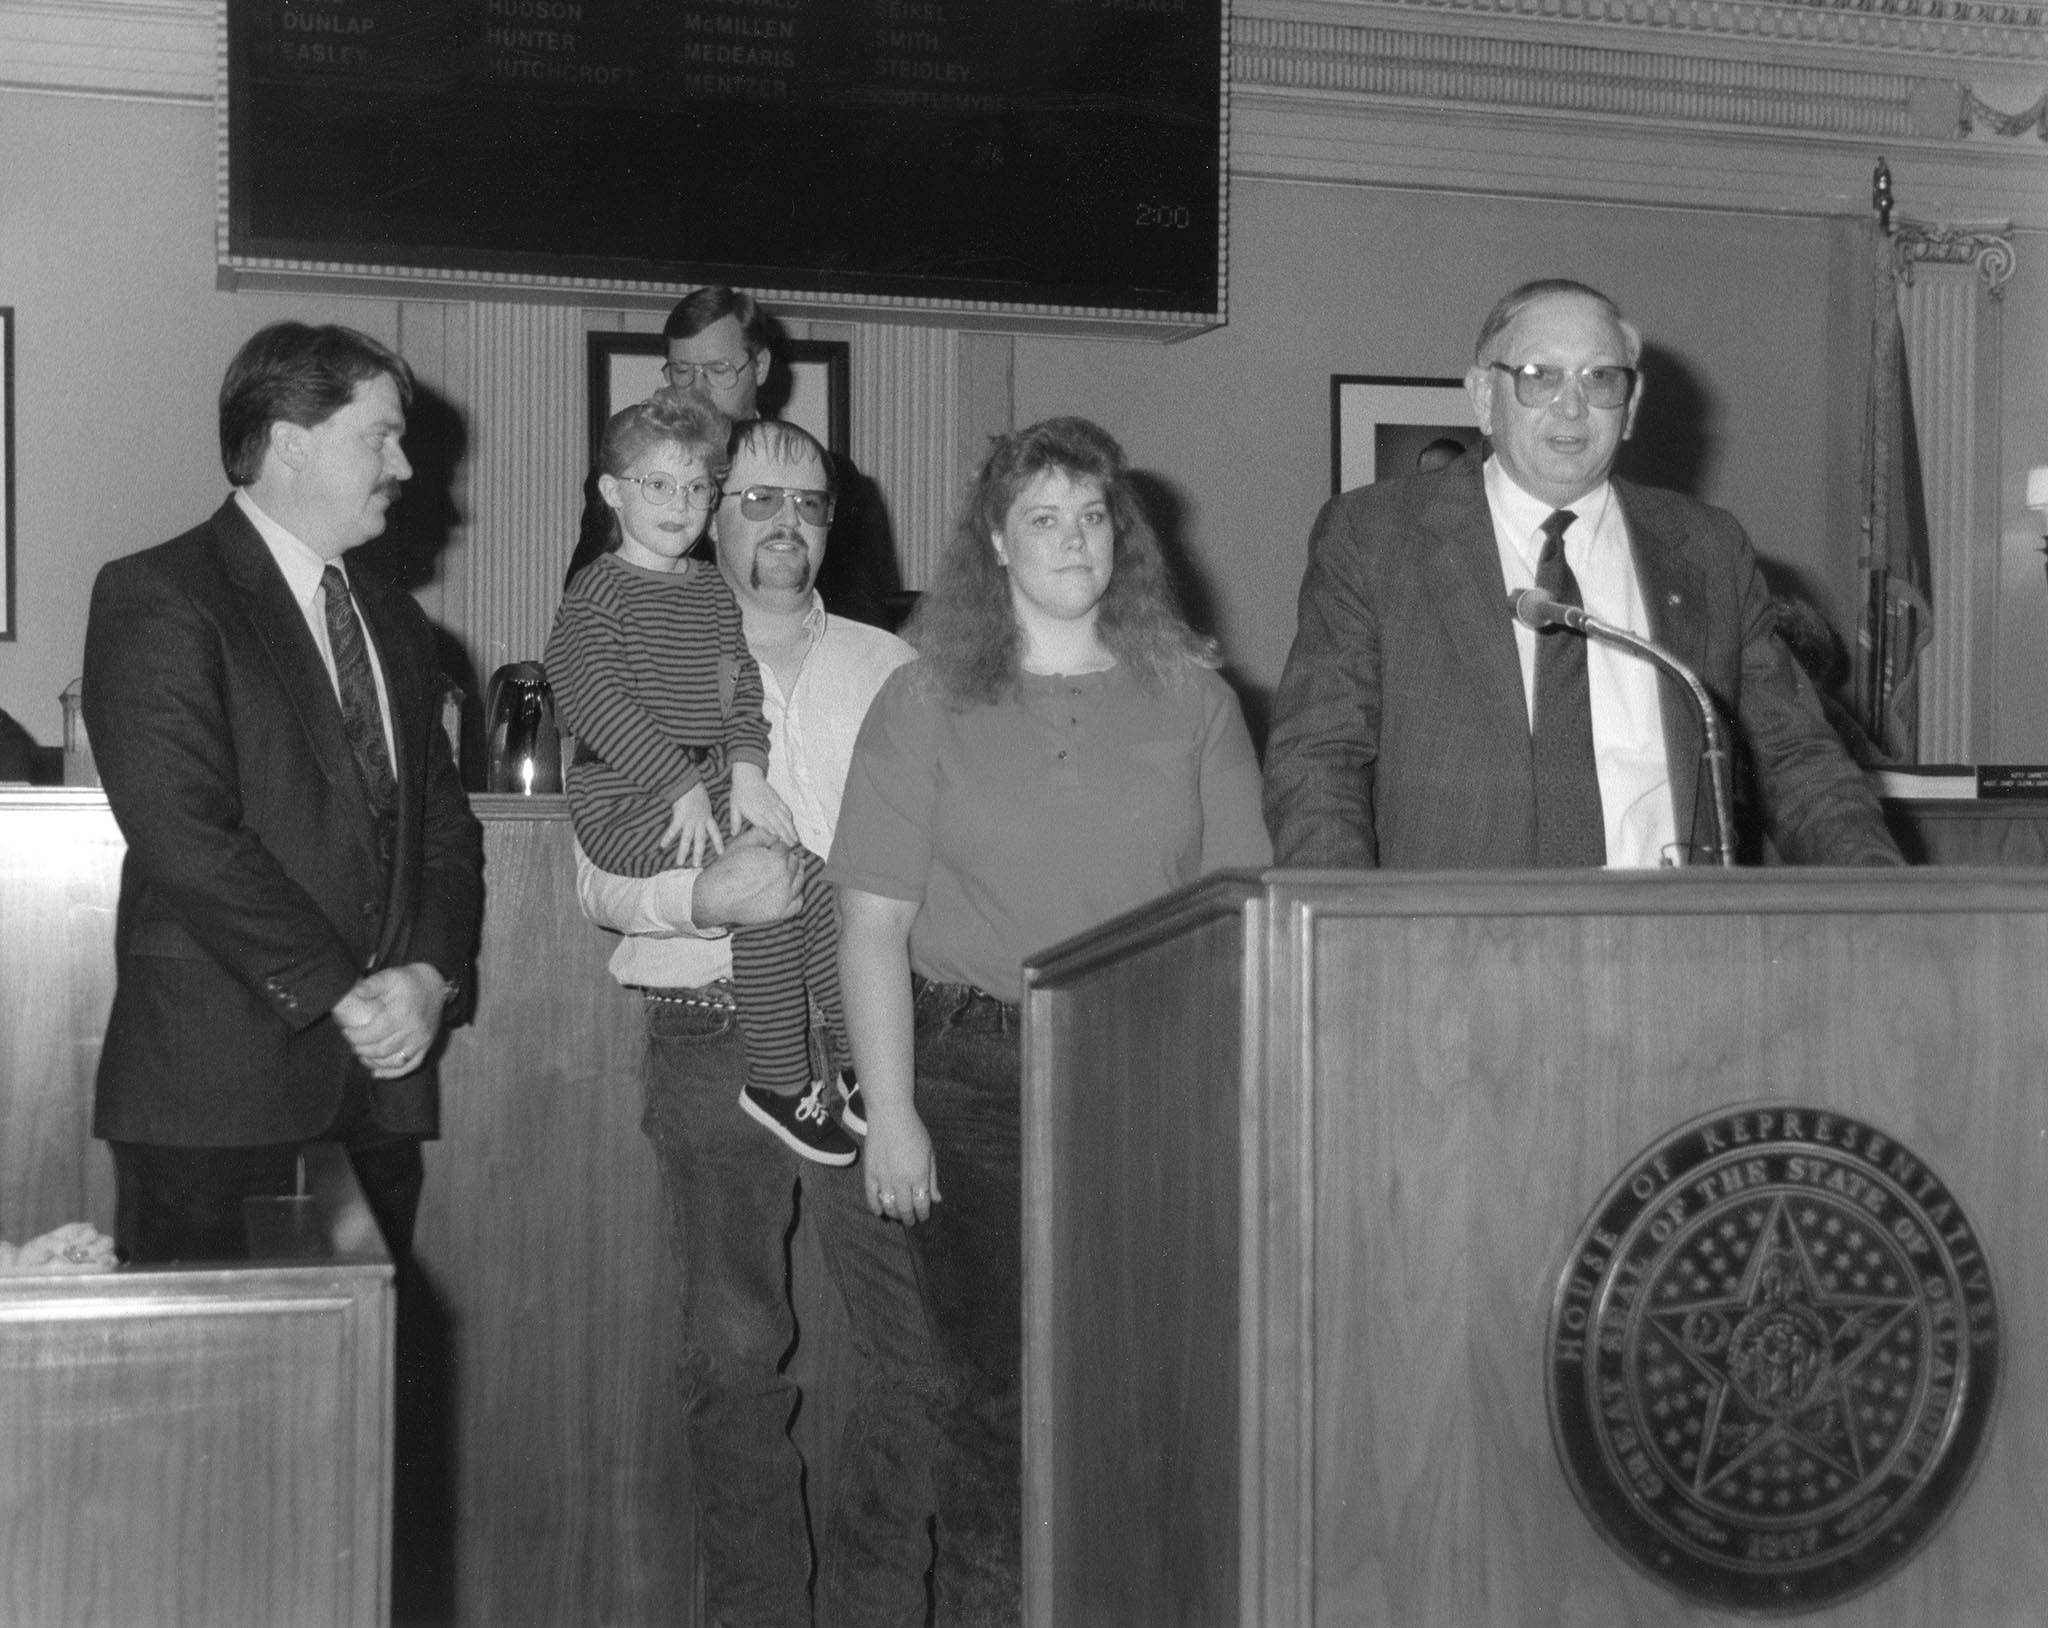 The importance of young farmers and ranchers was recognized in this 1990 photo, in which Rep. Jack Begley (right) presented a citation to the Oklahoma Farm Bureau Young Farm Family of the Year, Texas County’s Monte and Bobbi Smith. Begley read the citation recognizing the family to the House chamber while Speaker of the House Steve Louis (in background) and OKFB’s Director of Governmental Relations Dennis Howard (left) listened. The lawmaker told his counterparts he wanted them to meet an “endangered species – young farmers in Oklahoma.” The Smith family owned a diversified farm and ranch near Texhoma, where they raised cattle and grew wheat, alfalfa and sudangrass.